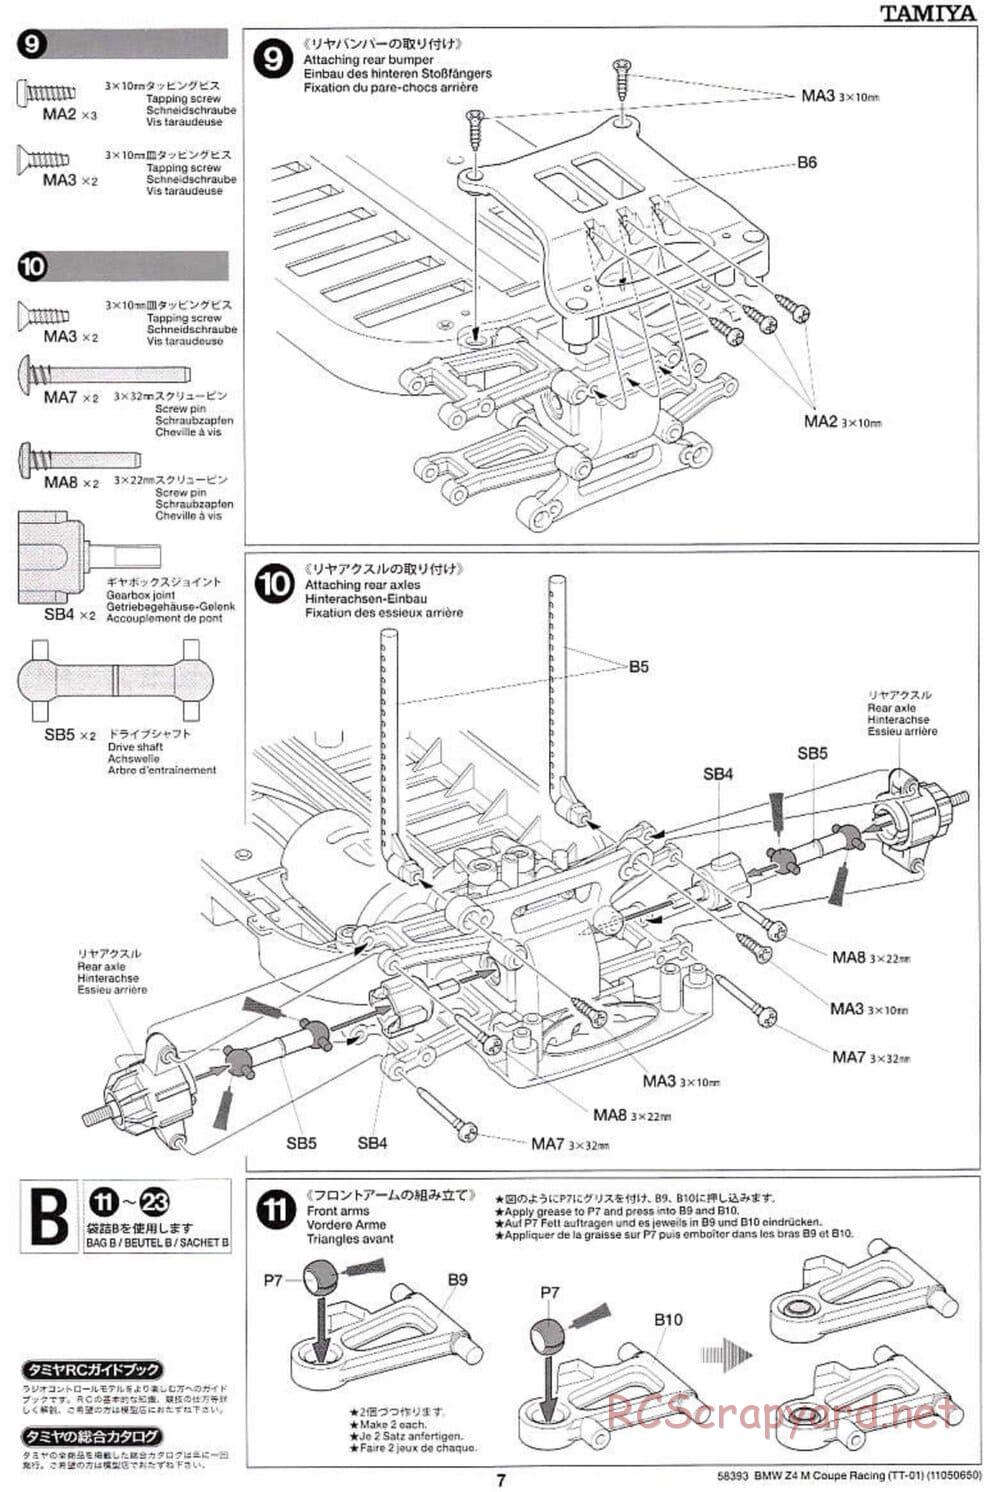 Tamiya - BMW Z4 M Coupe Racing - TT-01 Chassis - Manual - Page 7